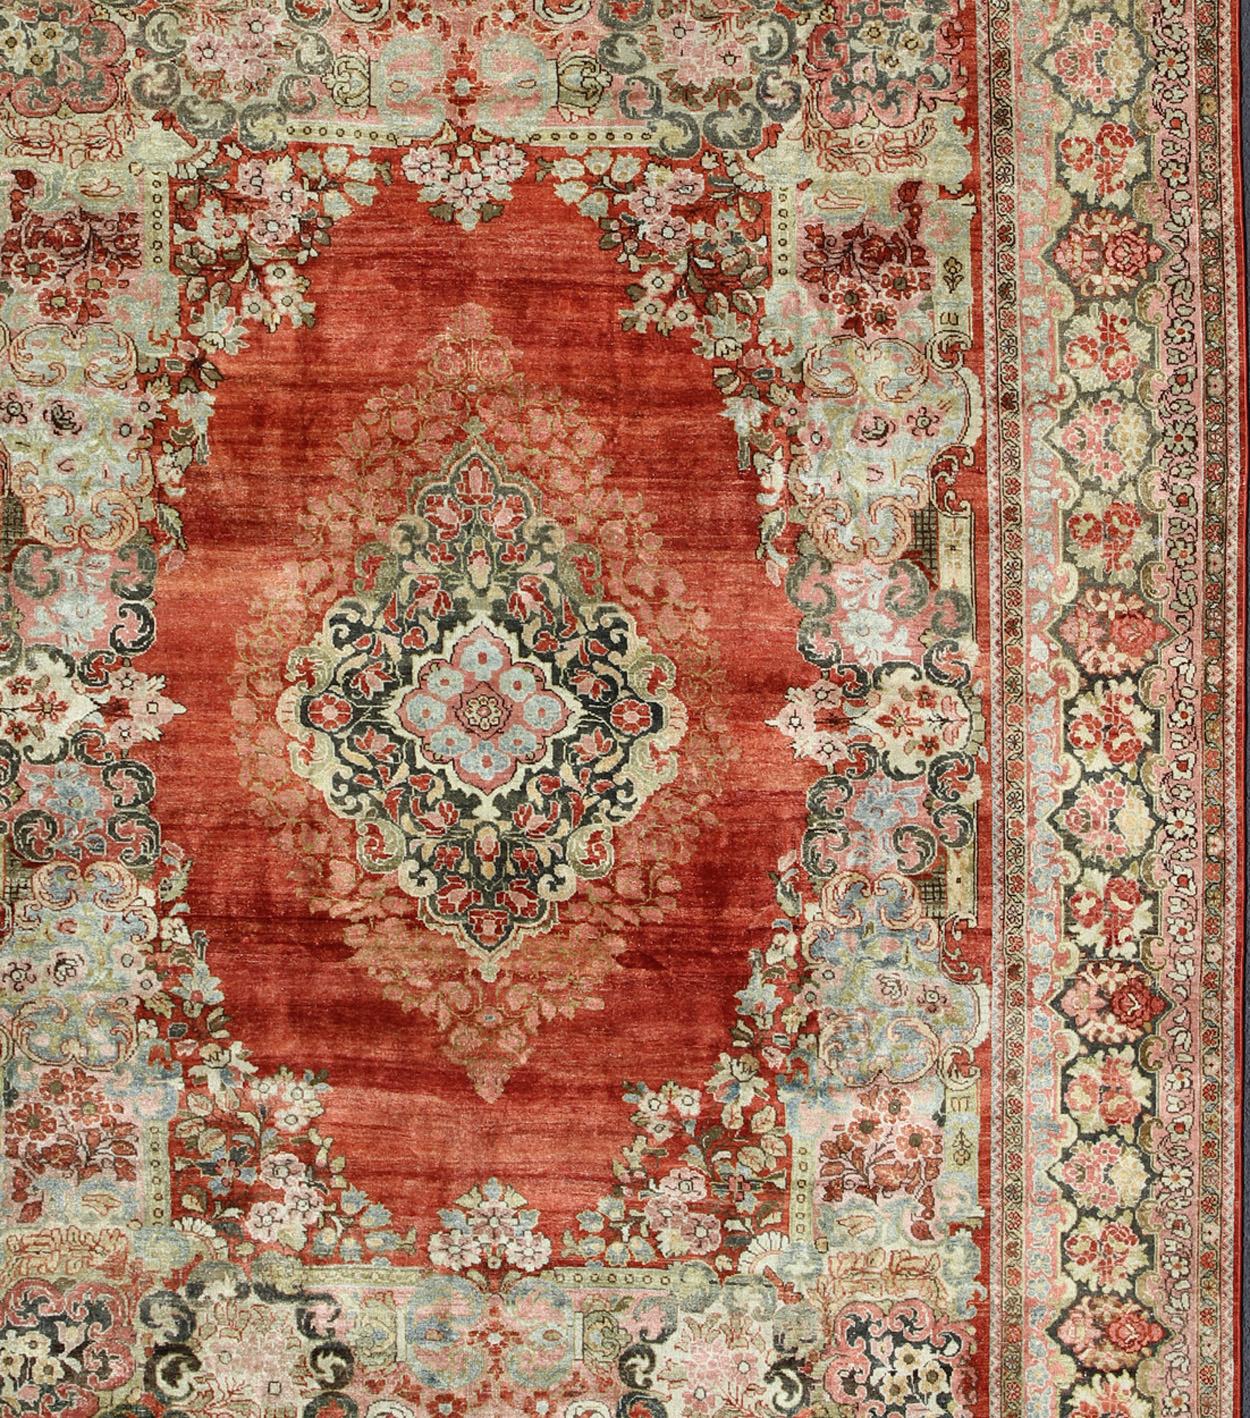 Hand-Knotted  Persian Antique Mahal Rug with Beautiful Floral Design in Red, Pink, and Green  For Sale